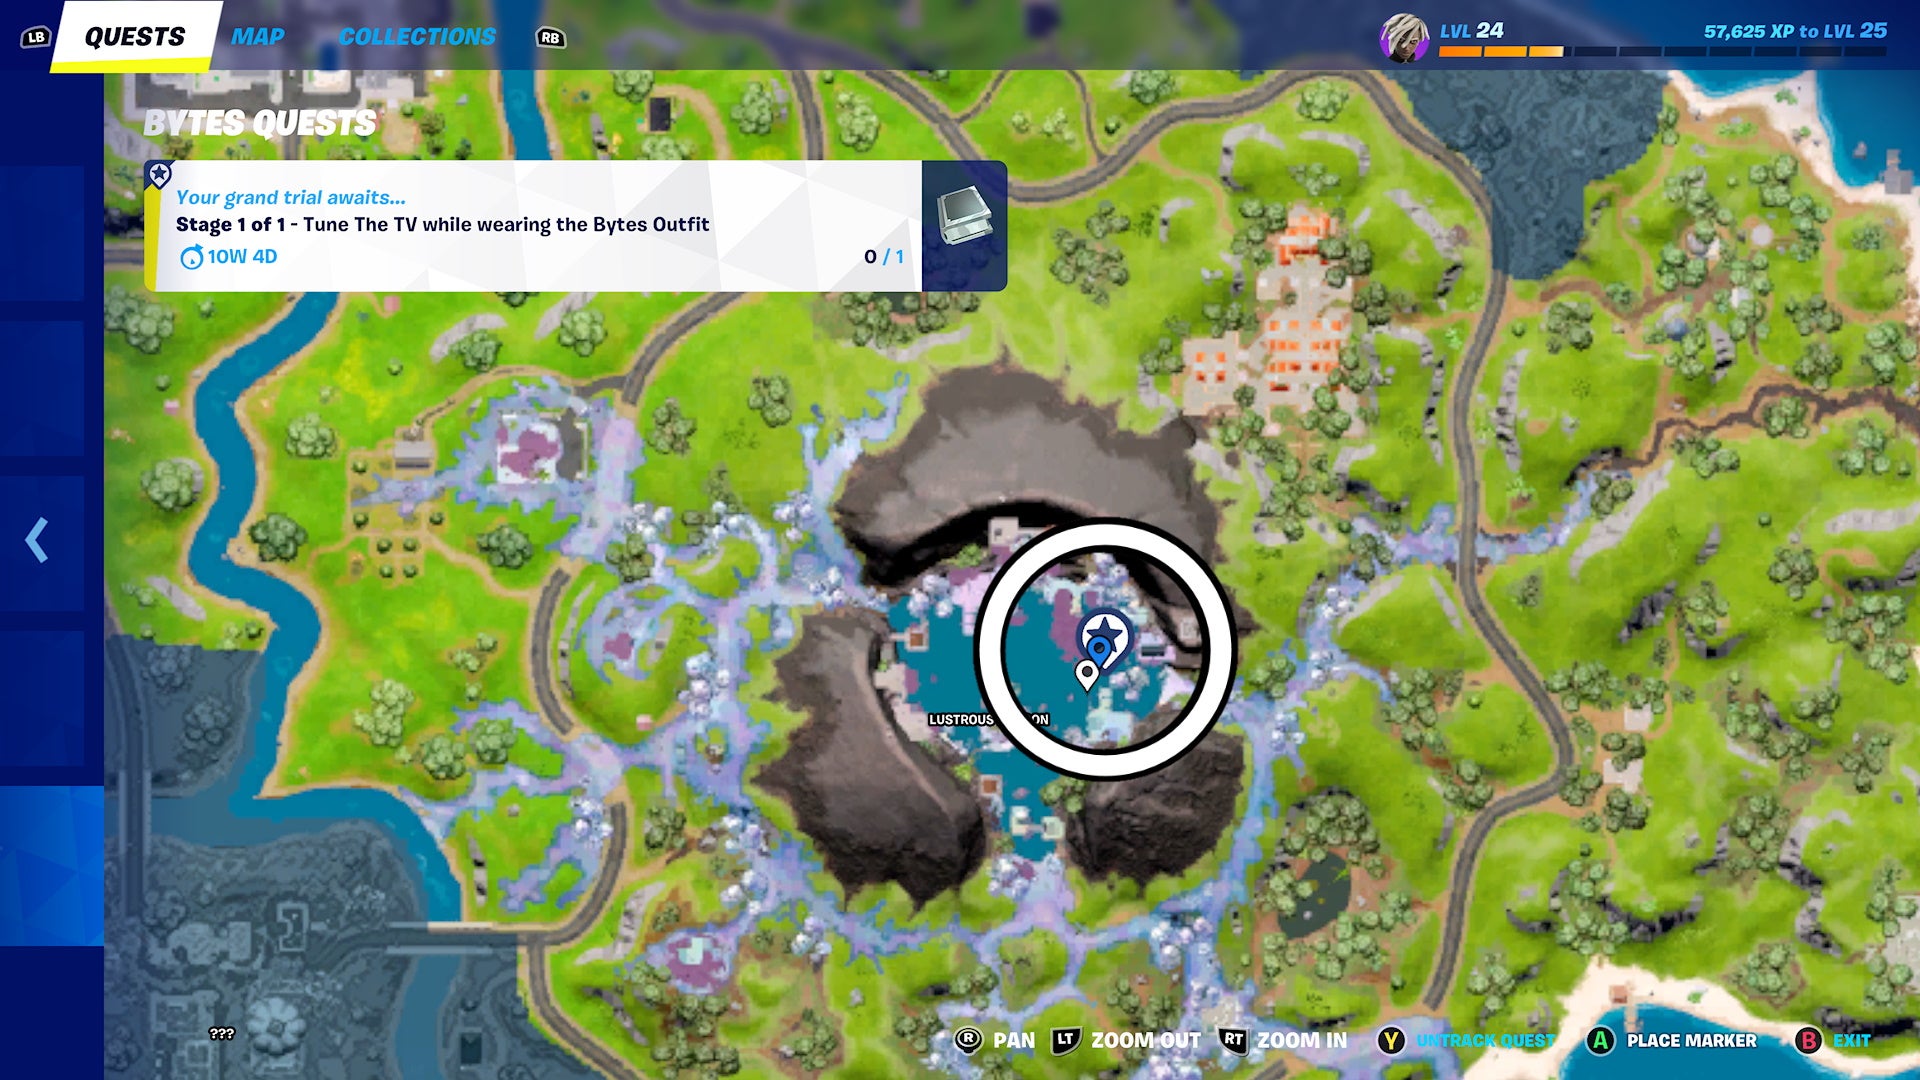 How to tune the TV in Fortnite while wearing the Bytes outfit map 2